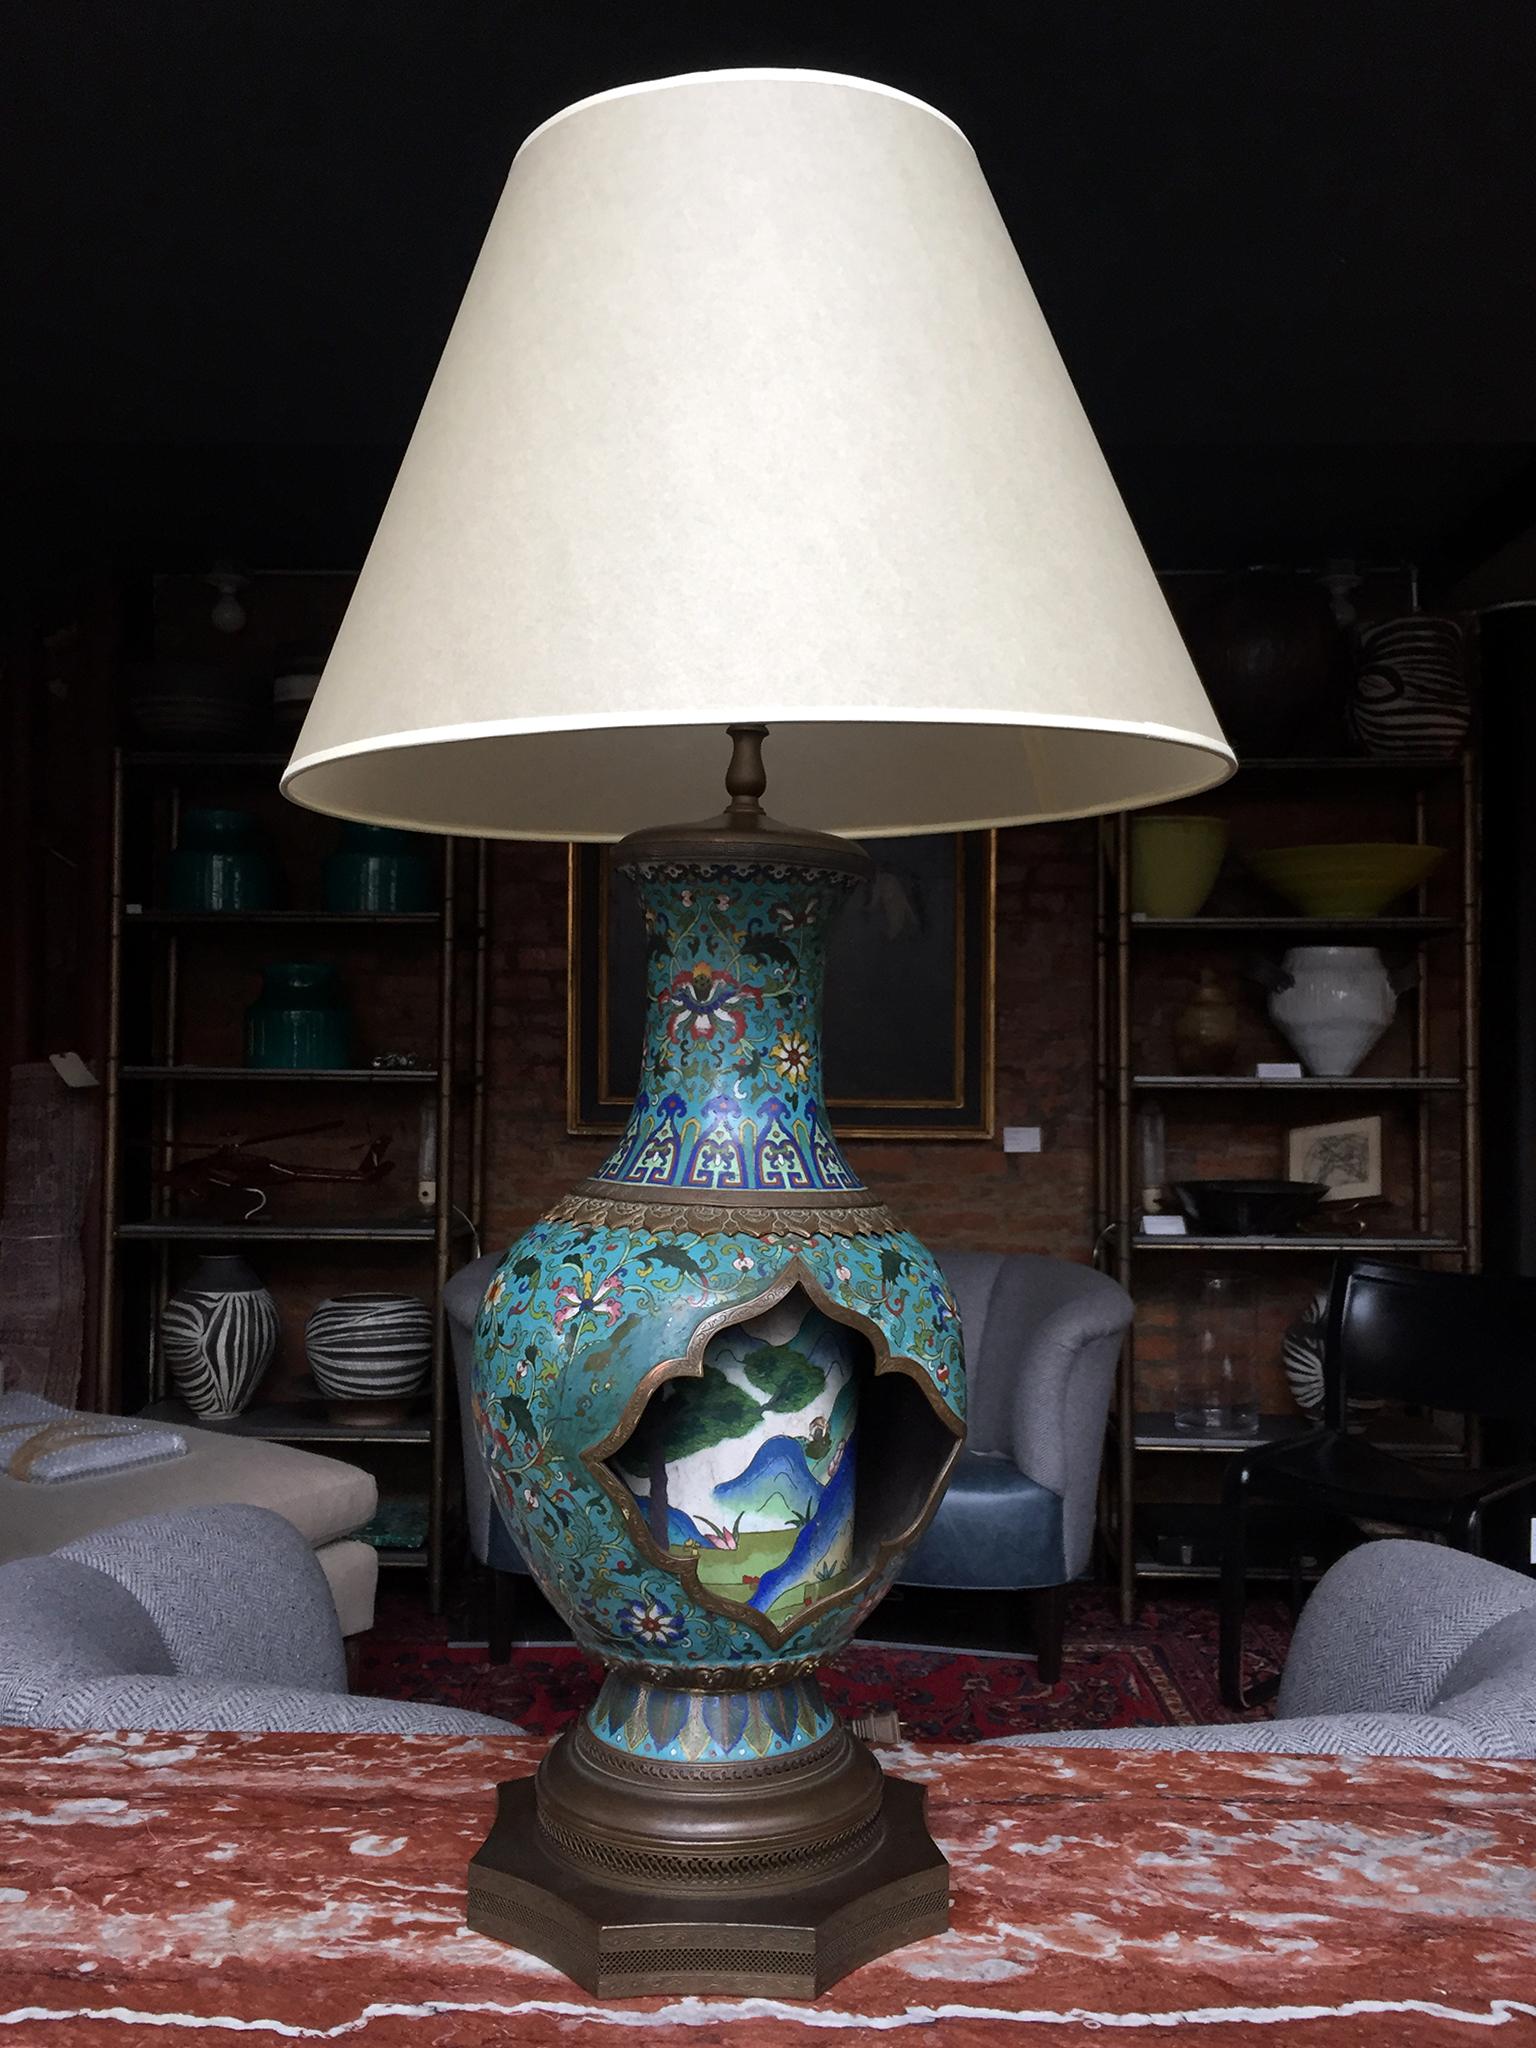 This antique Chinese lamp dates to the late 19th-early 20th century. It is exceptional for its bold color and rich floral pattern. The lamp's body is comprised of a brass vase, which is expertly decorated in the cloisonné technique. Stylized